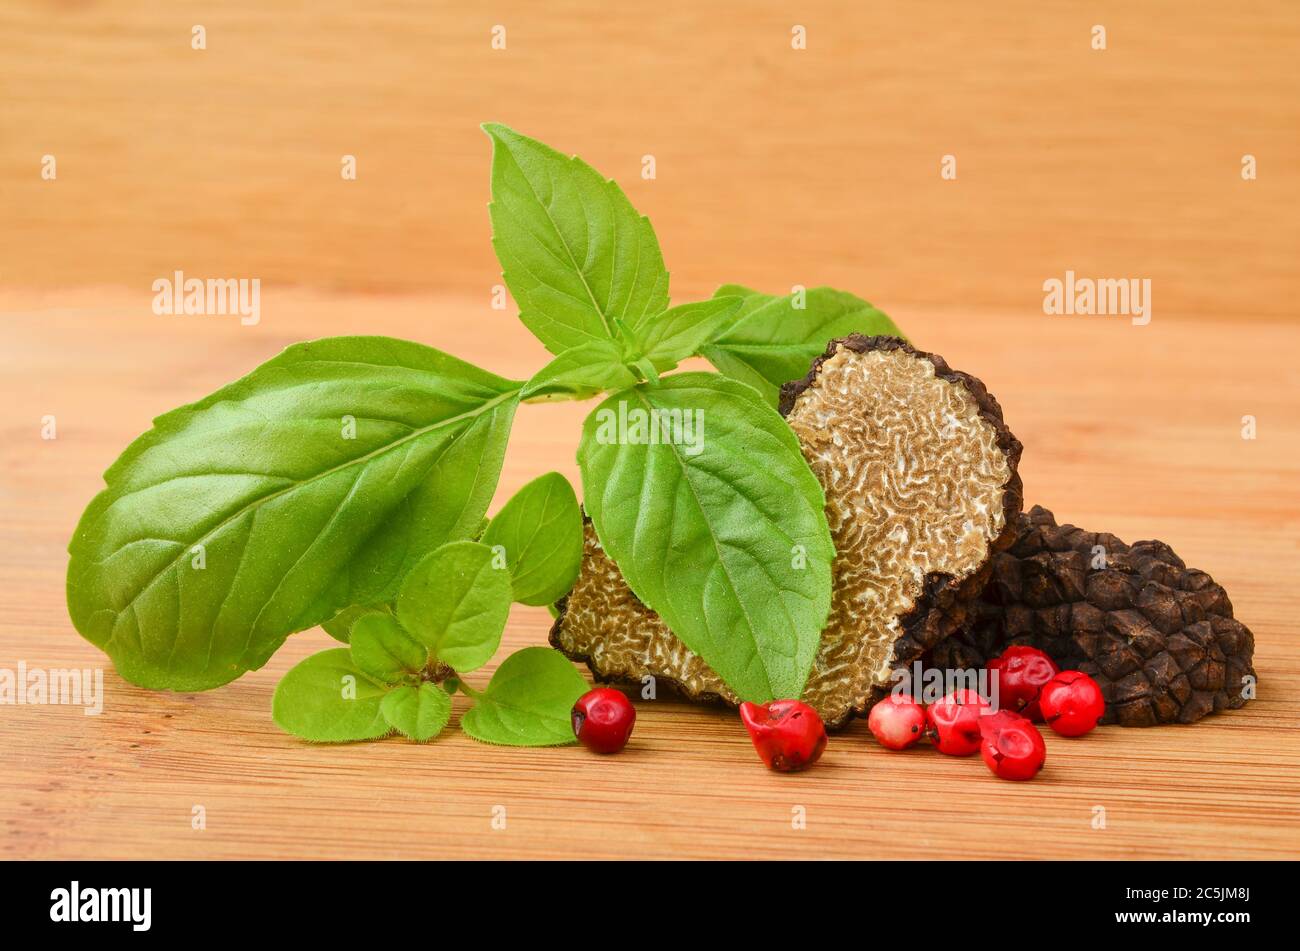 Black truffle cut on half on wooden background, with basil, oregano and red pepper Stock Photo